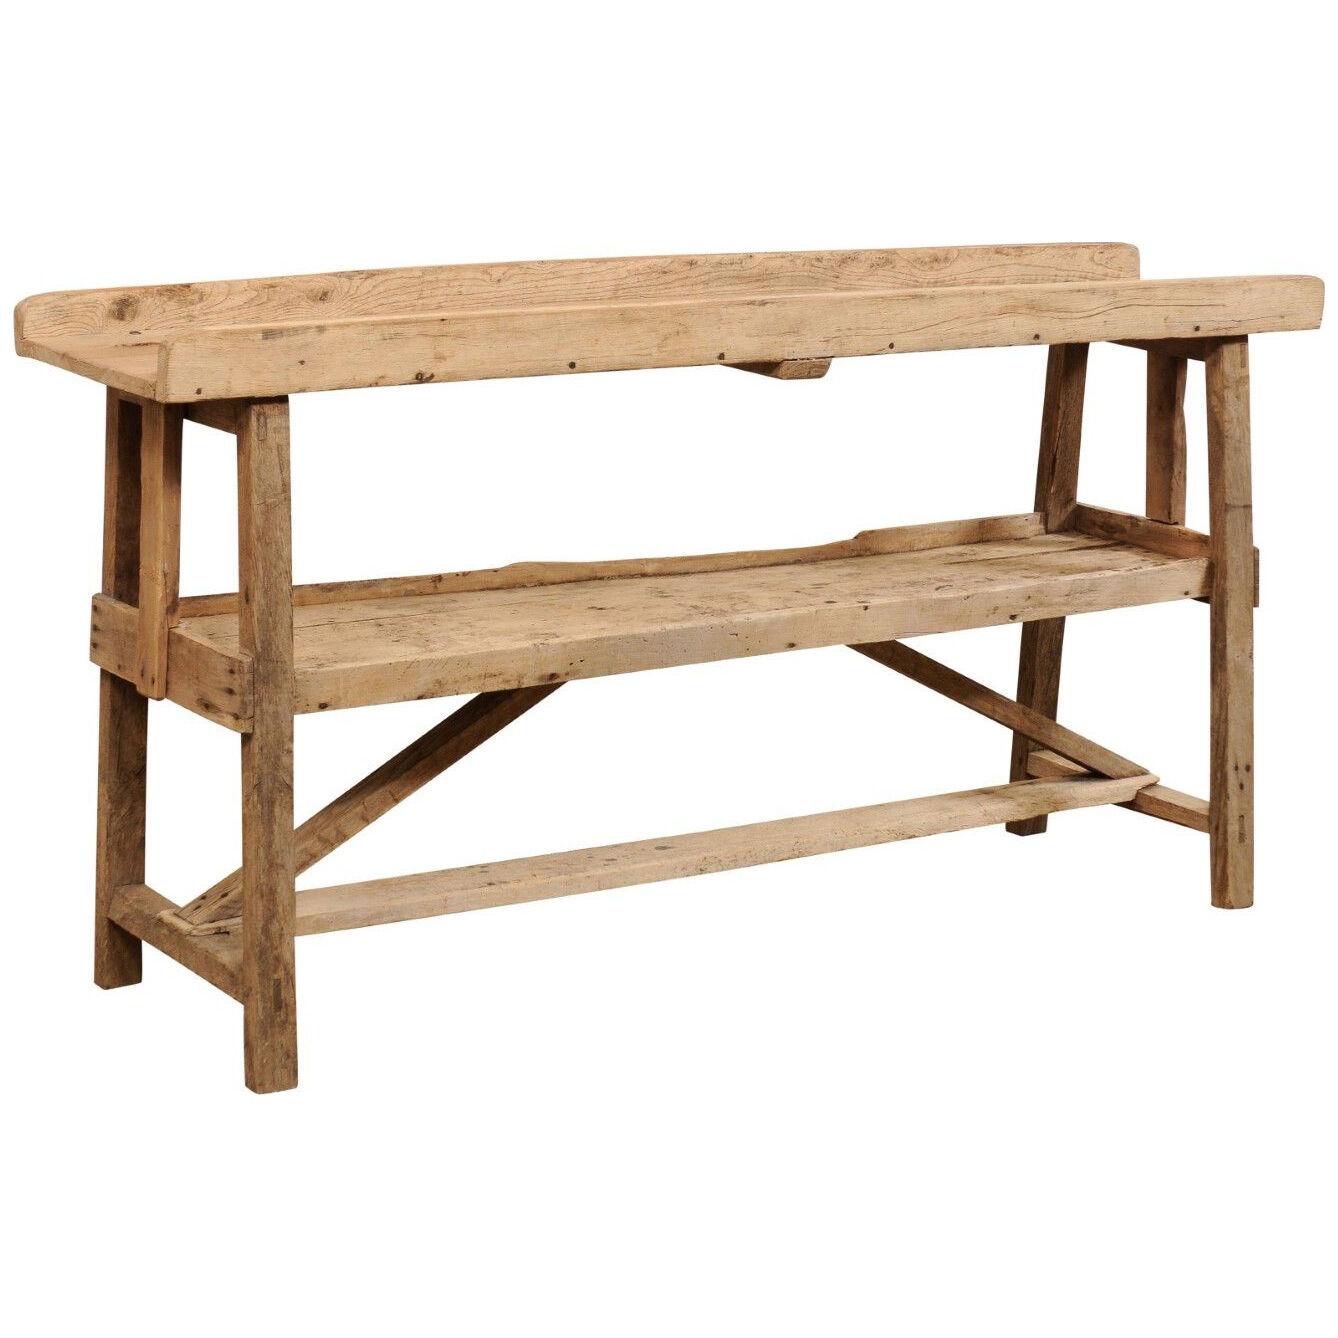 Rustic Spanish Tiered Wooden Antique Table